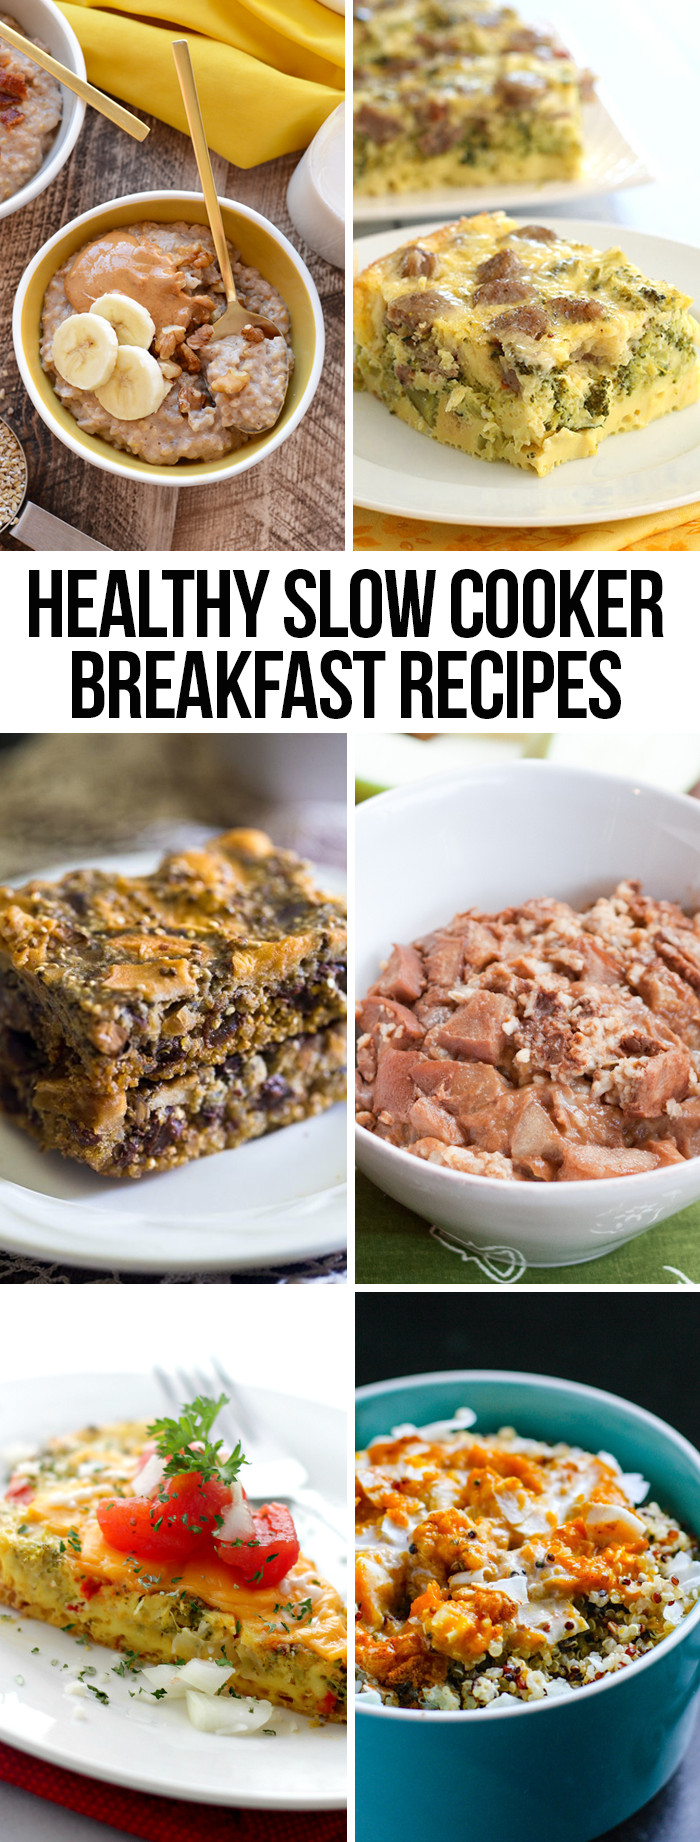 Slow Cooker Healthy Recipes
 Healthy Slow Cooker Breakfast Recipes